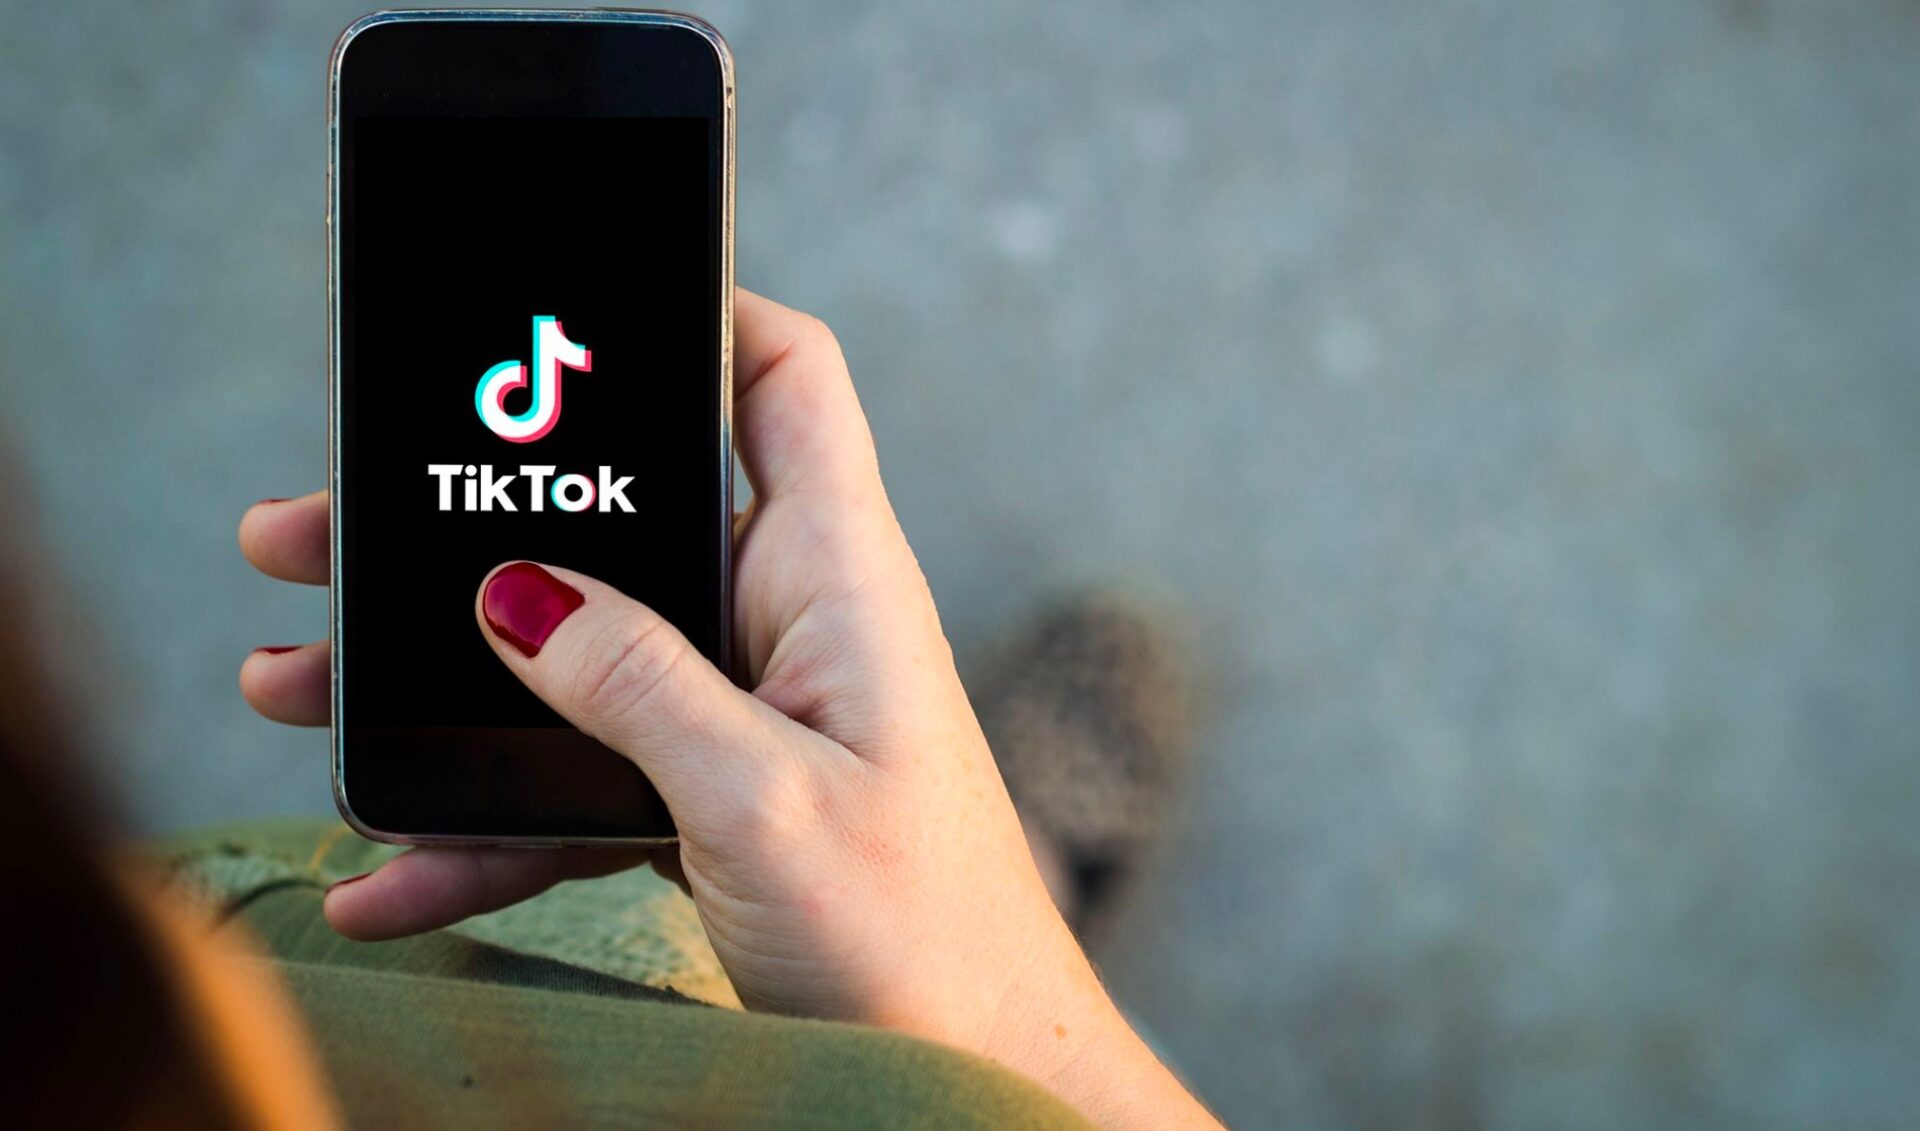 About half of the adult TikTok users in the U.S. have posted a video